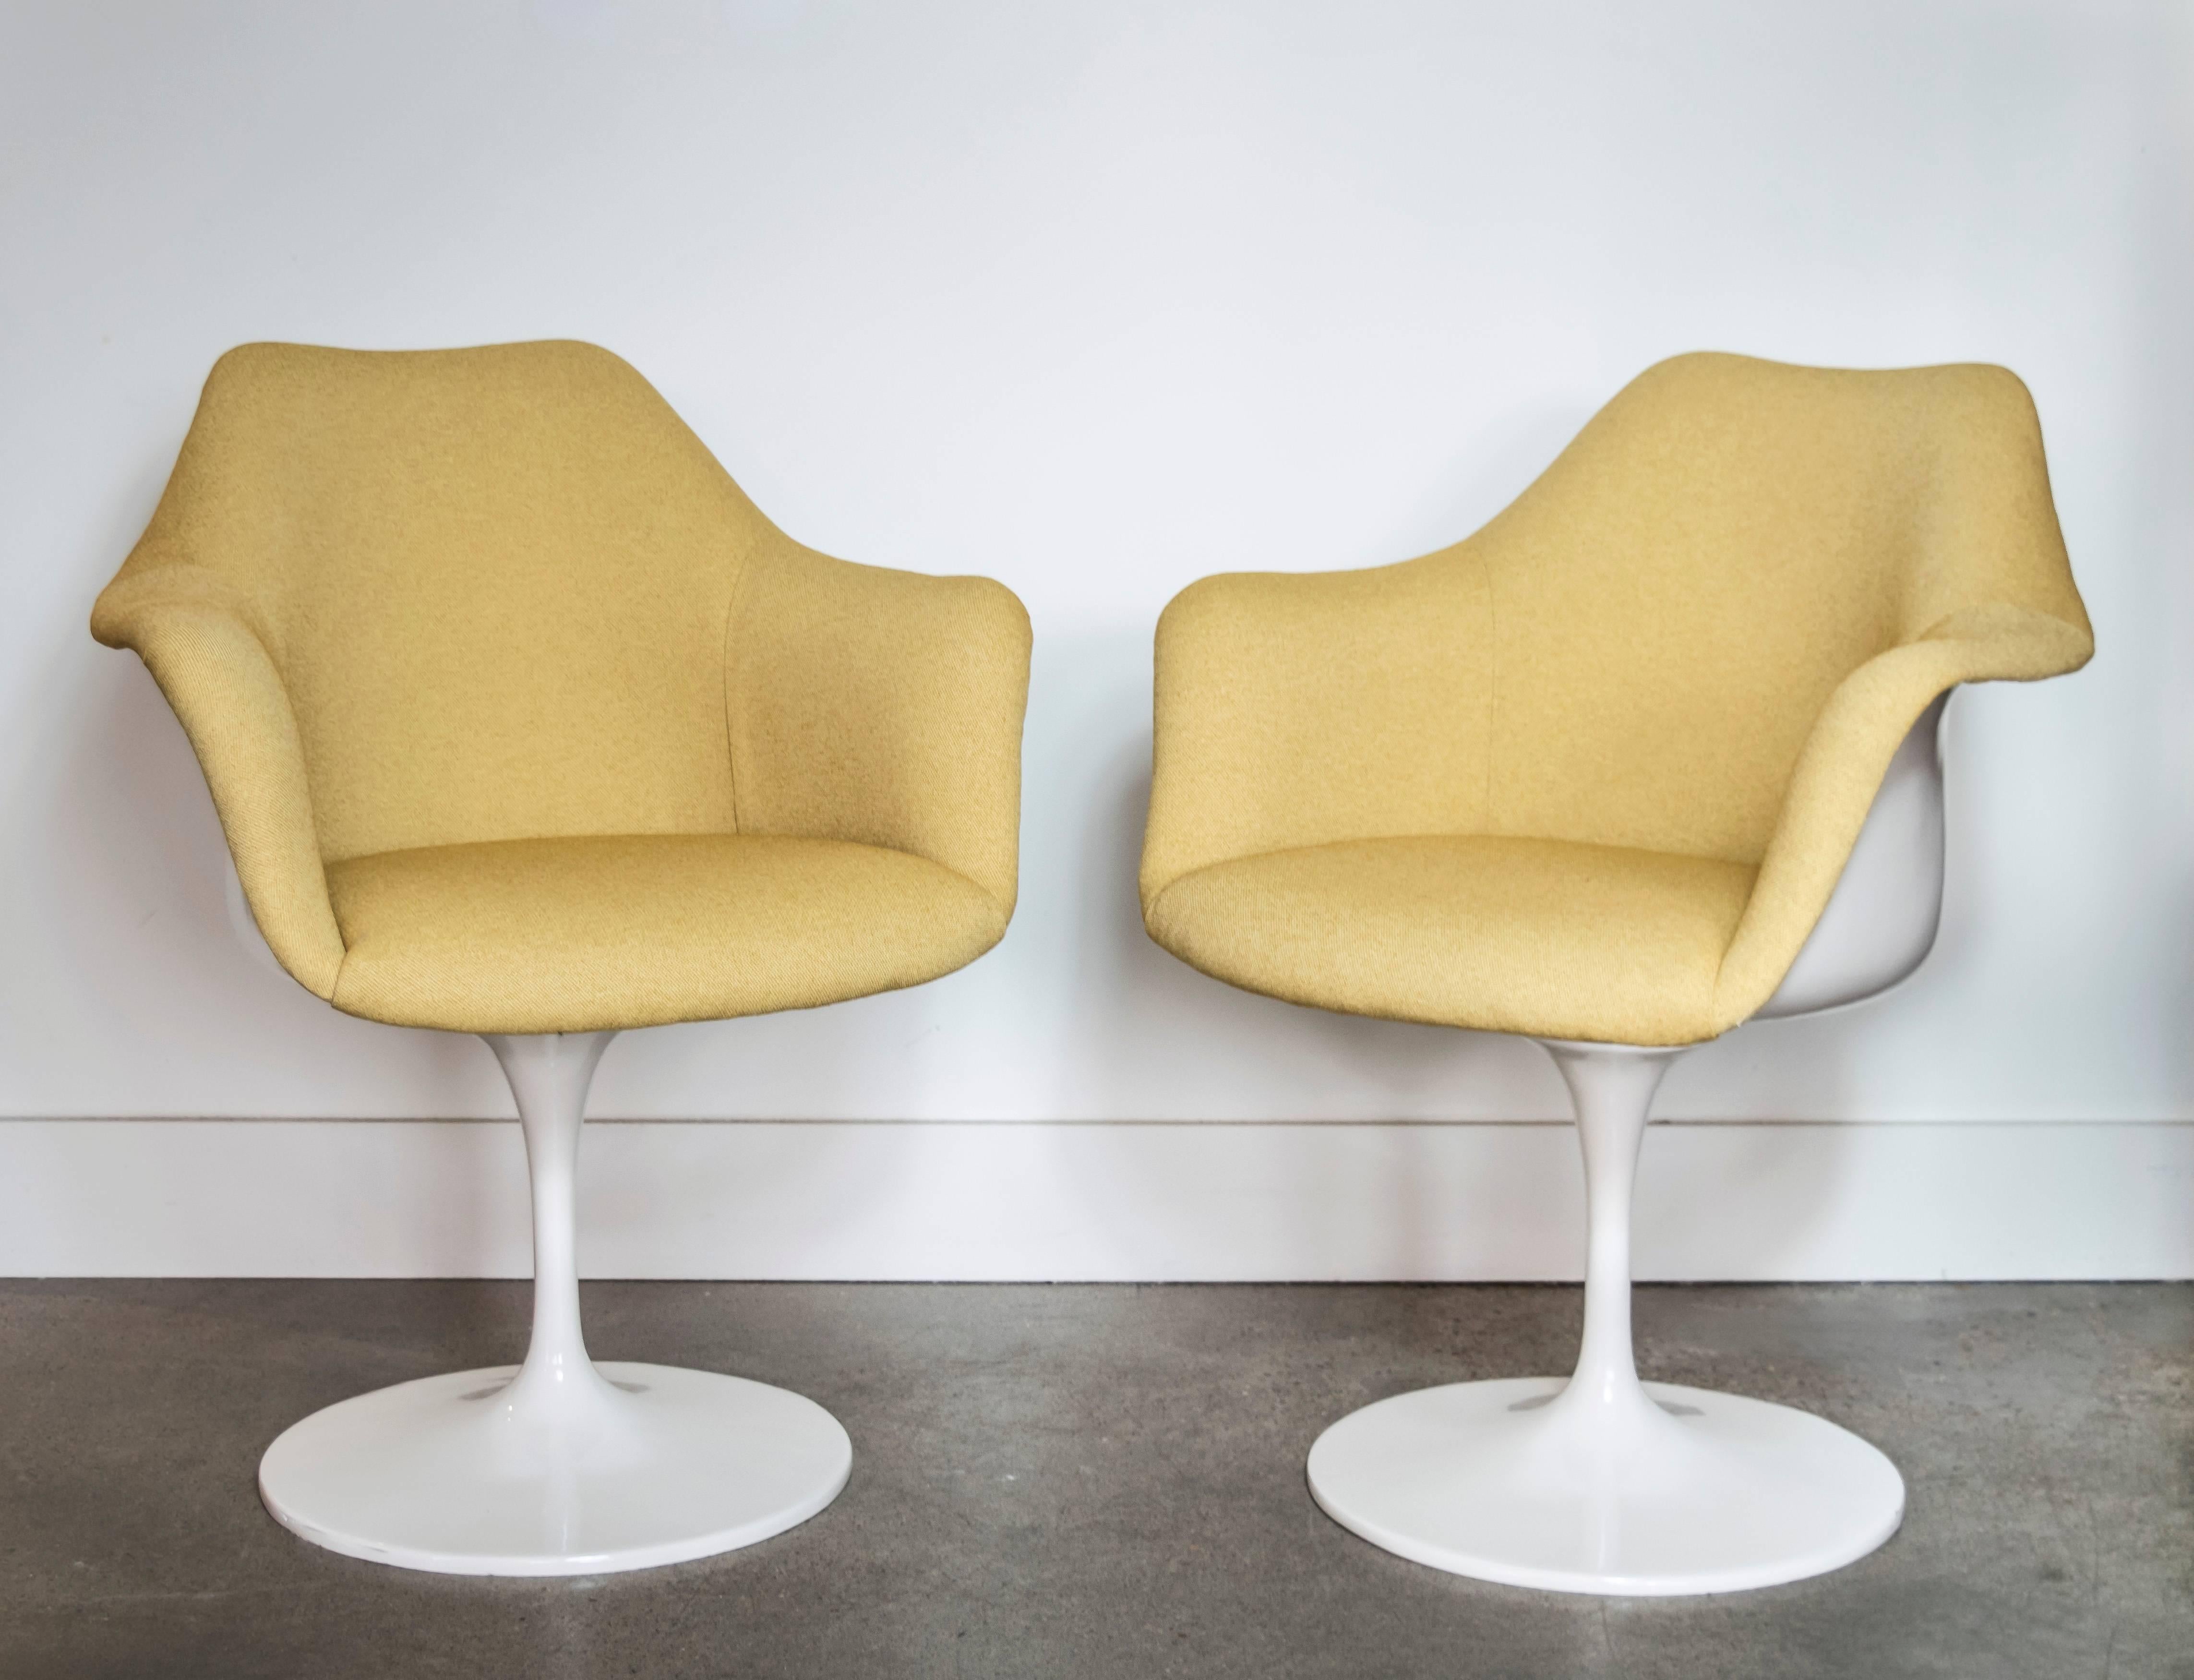 It's difficult to find ten matching early Knoll chairs with the full back upholstery. Recently restored and recovered in Knoll goldish / yellow upholstery. Stunning addition to any home or office.